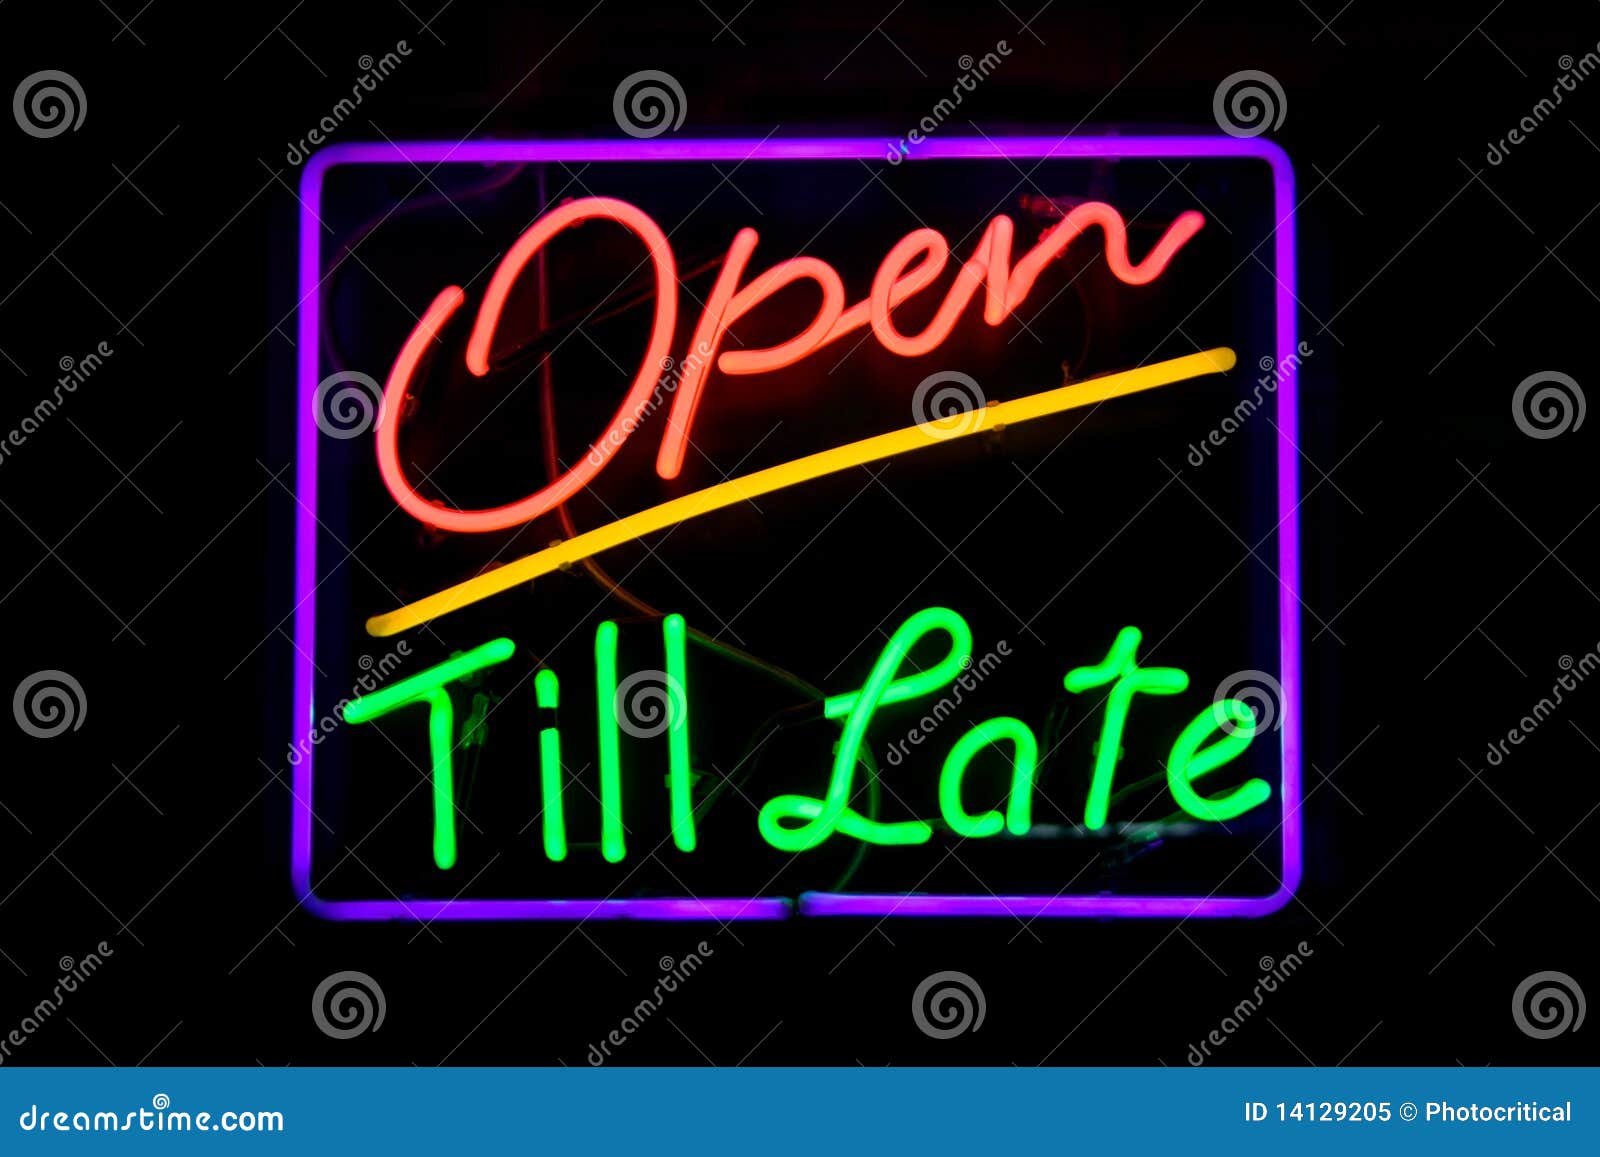 Open Till Late Neon Sign Royalty Free Stock Photo - Image ...